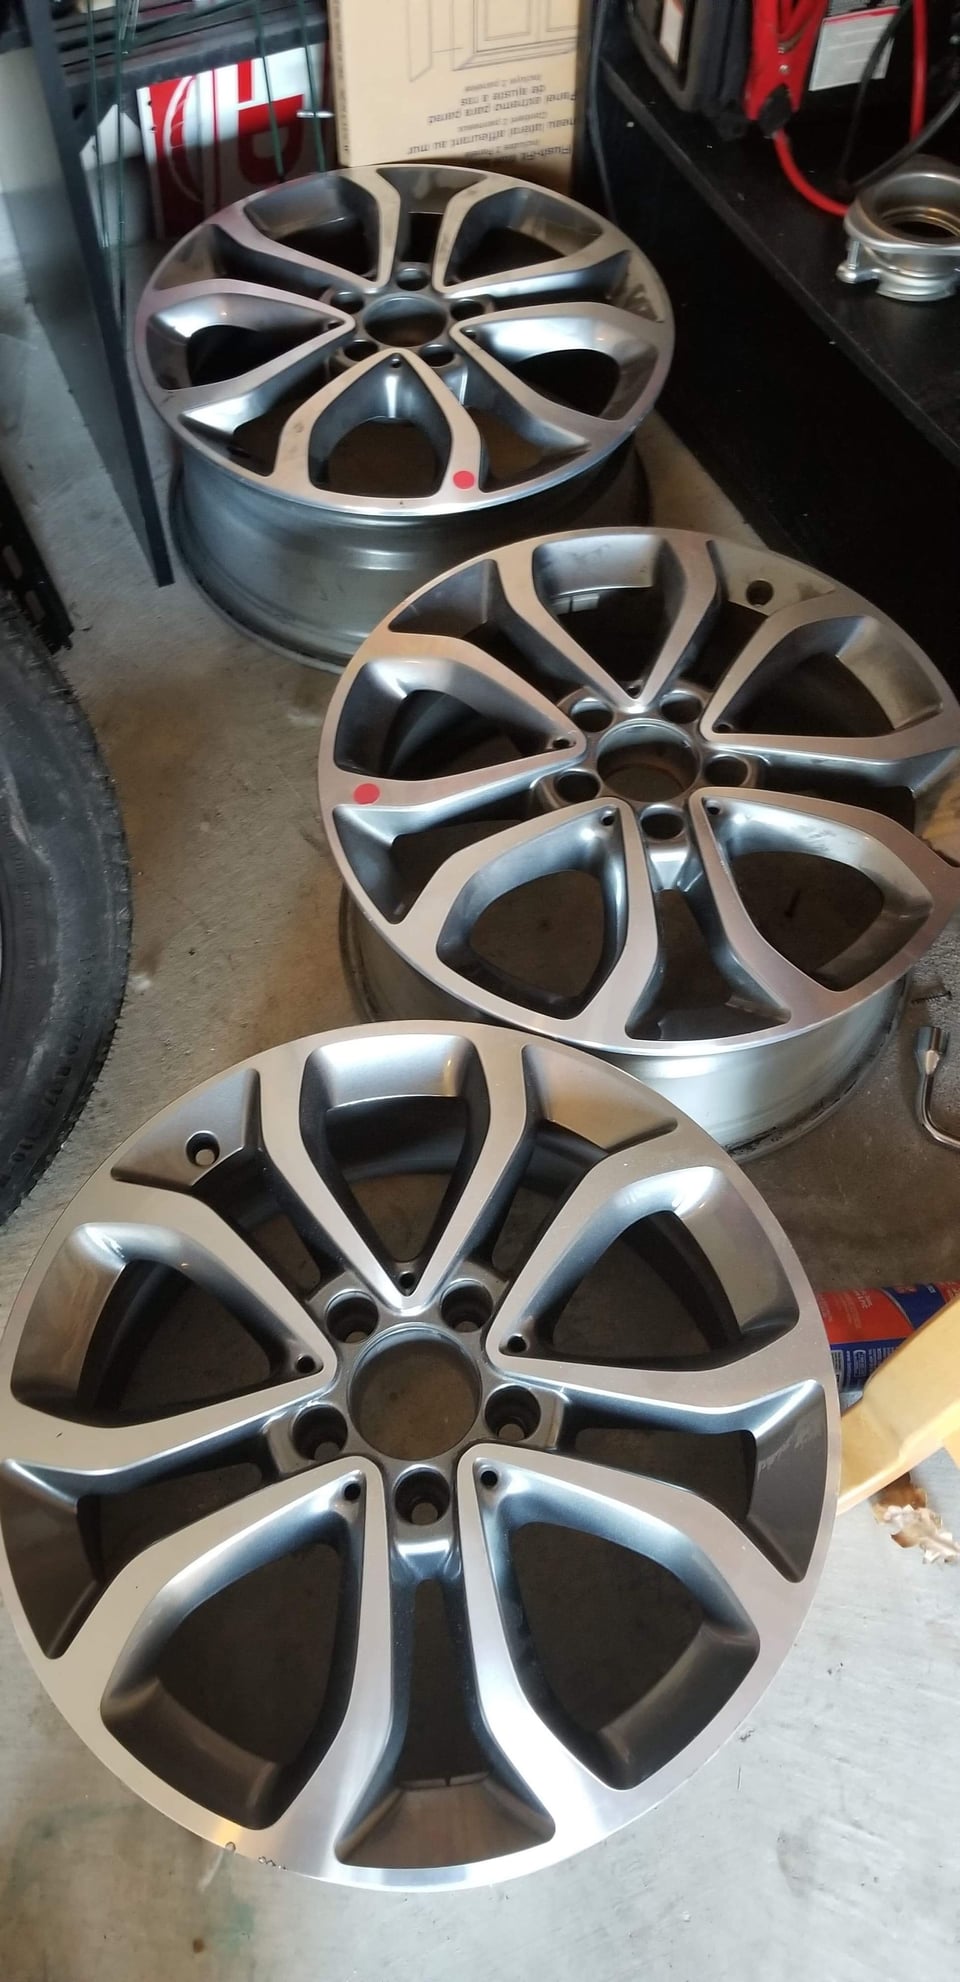 Wheels and Tires/Axles - FS: Set/3  17inch C-Class wheels - Used - 2015 to 2019 Mercedes-Benz C300 - 2014 to 2019 Mercedes-Benz CLA250 - San Antonio, TX 78255, United States